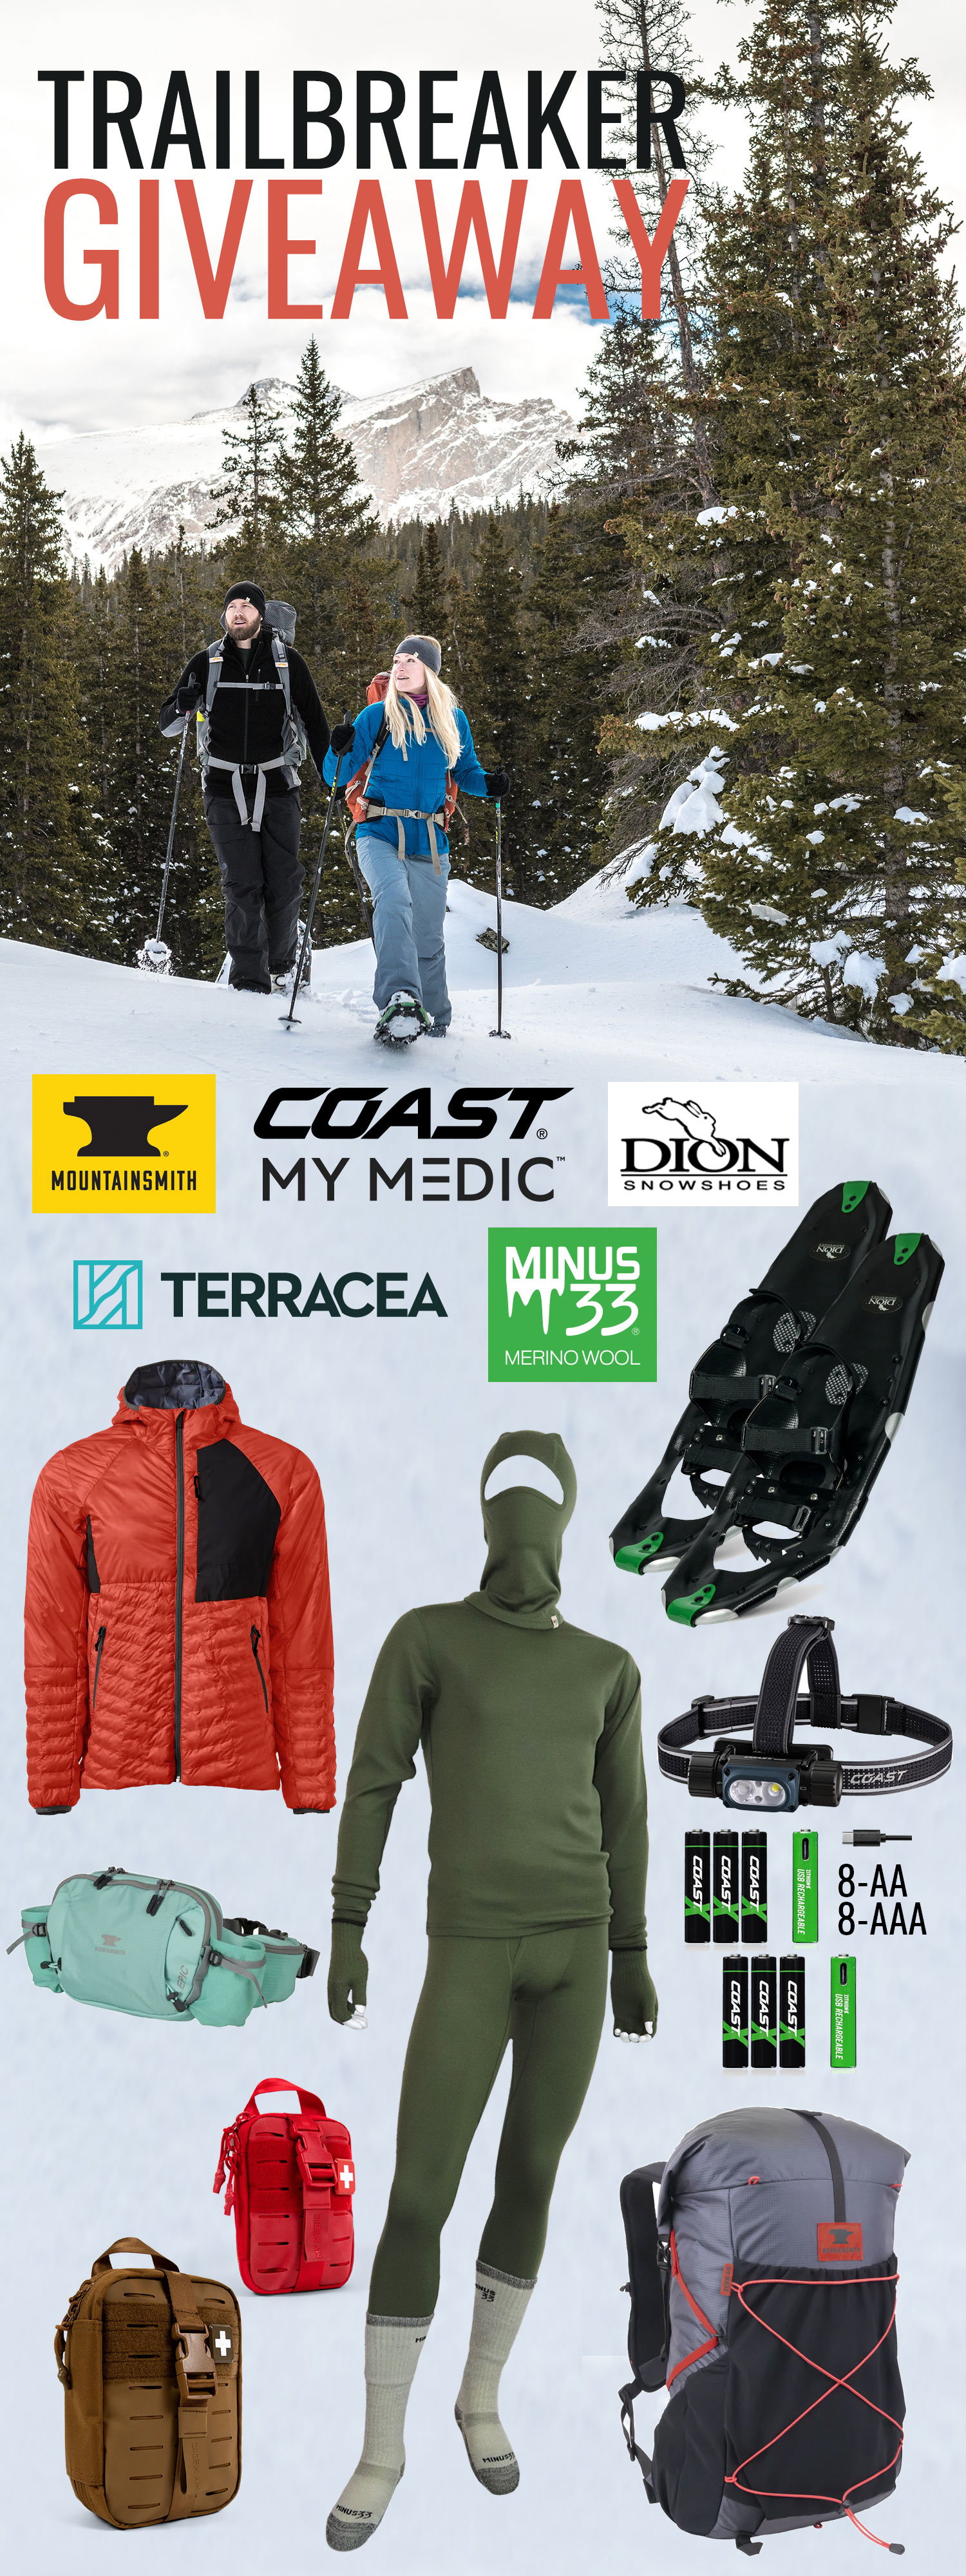 Minus33 Merino Wool Clothing - Here's a chance to win everything